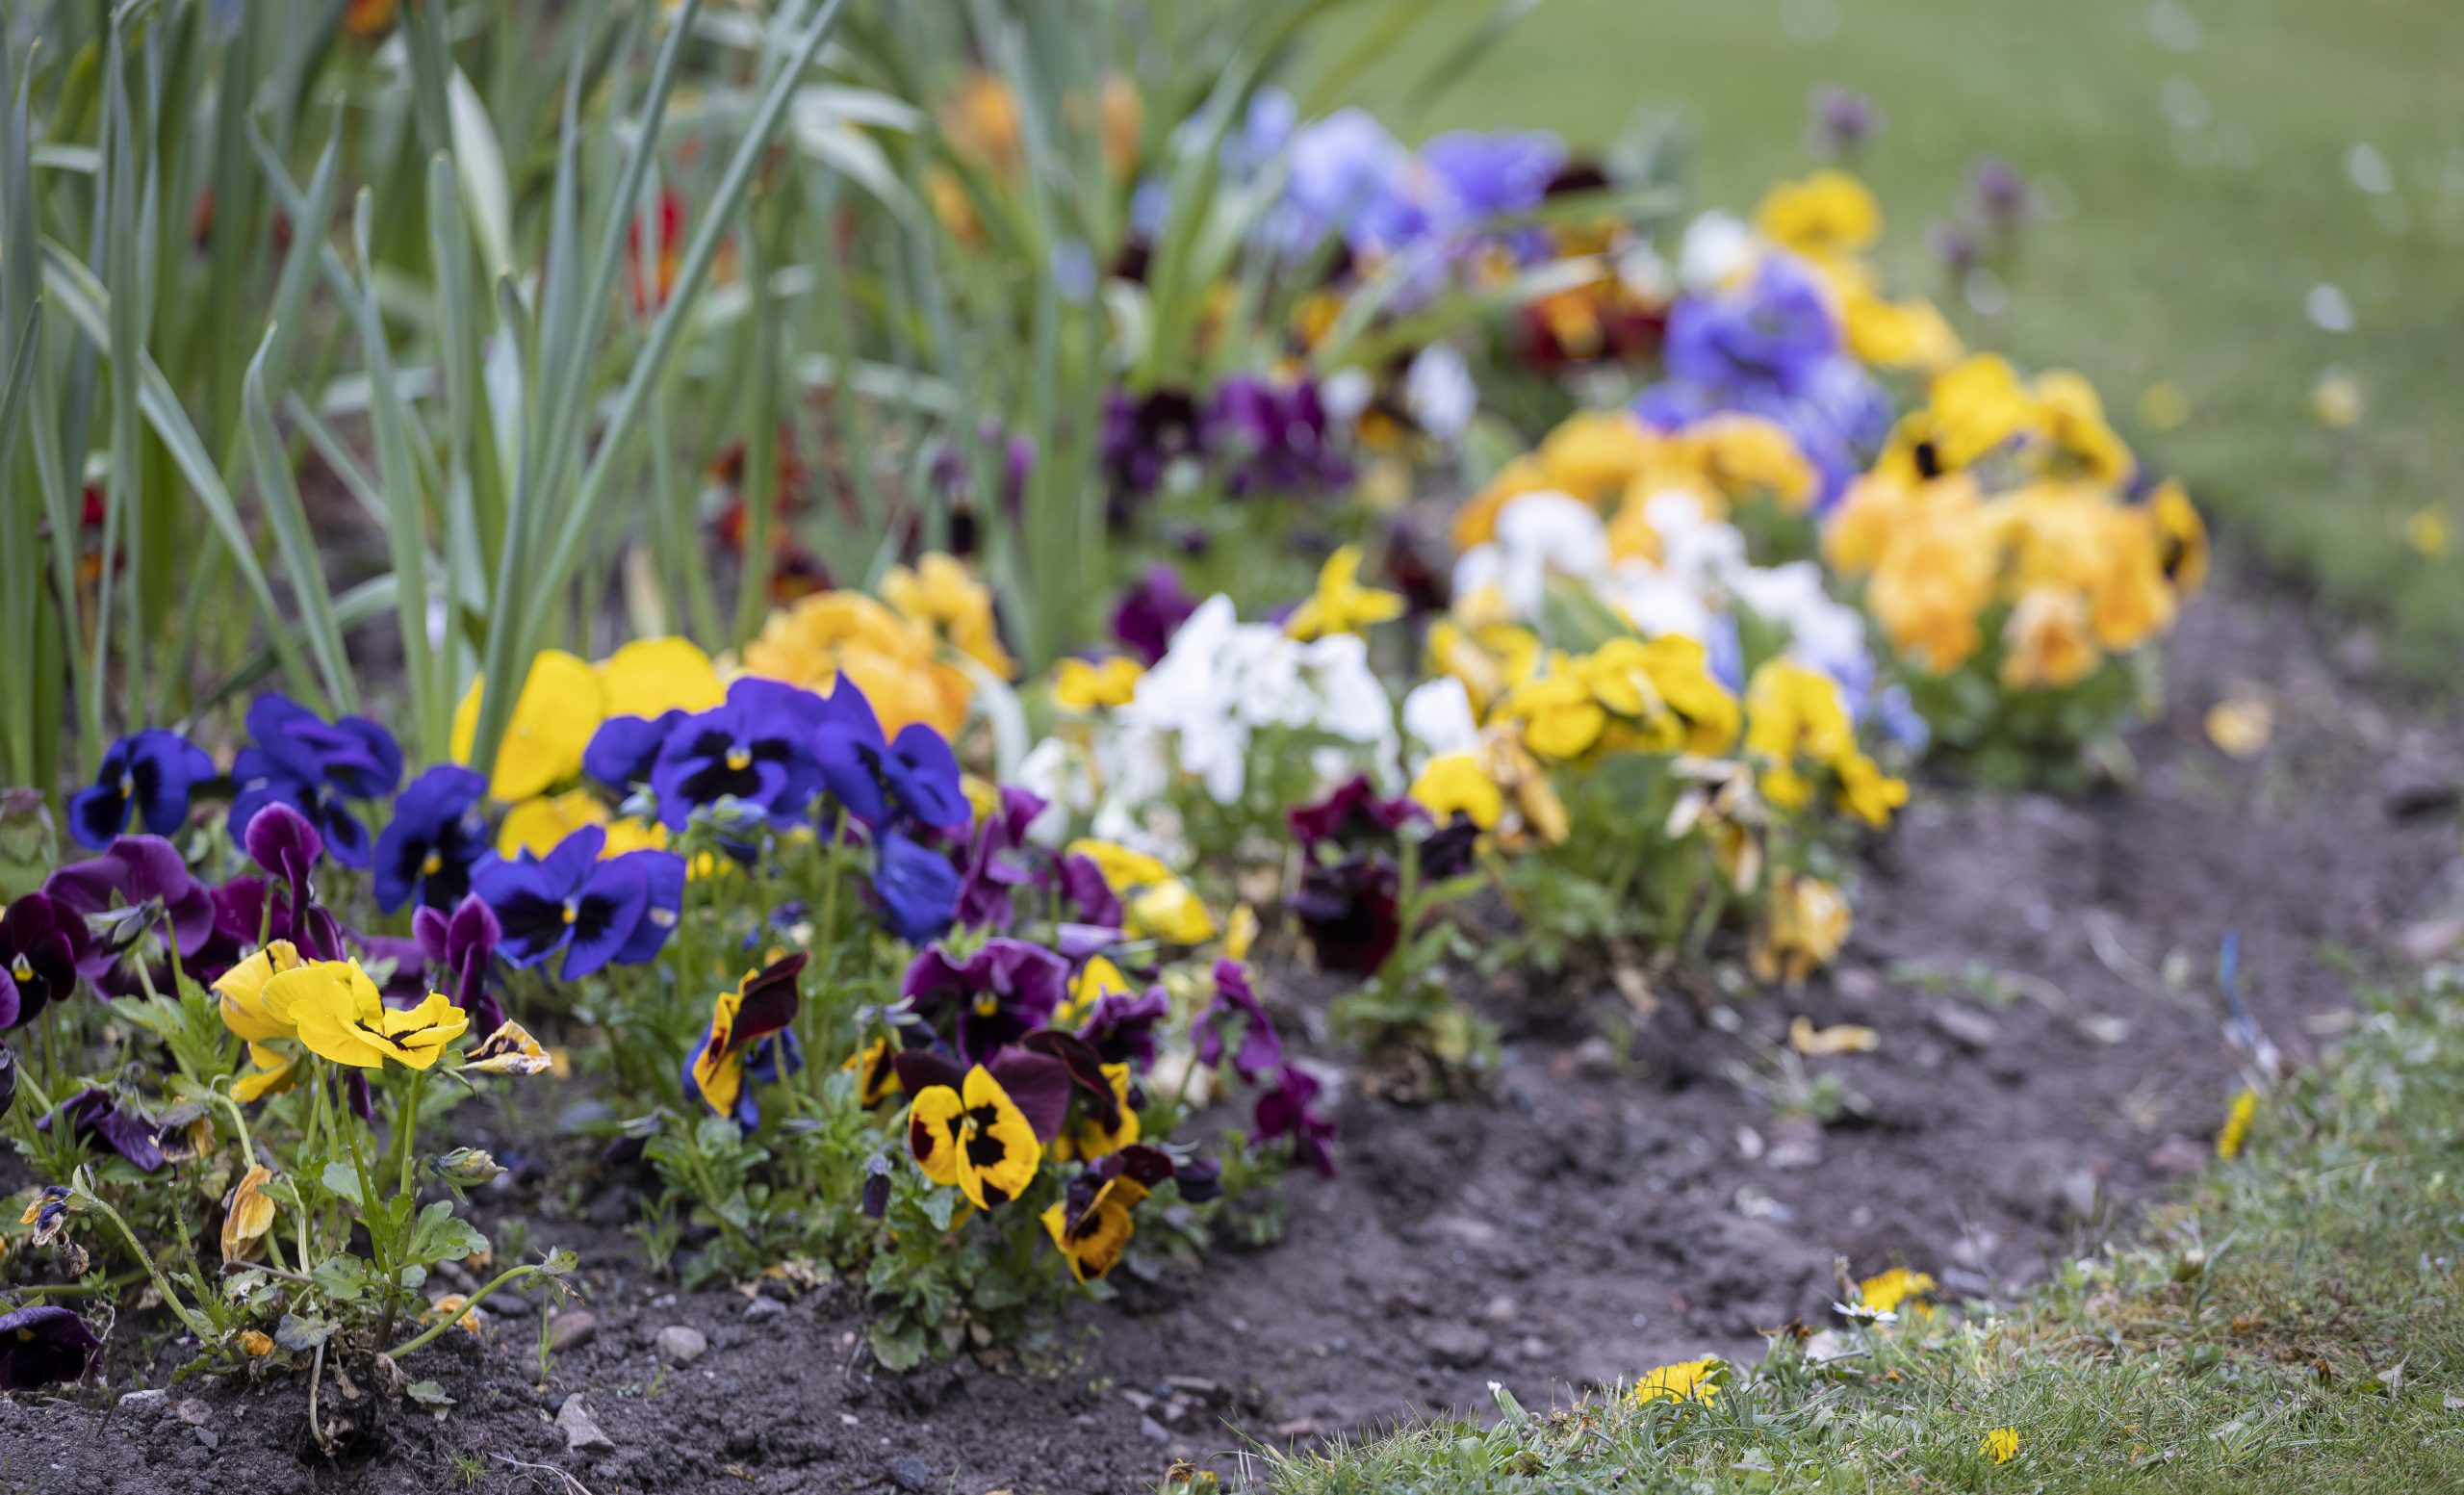 Flower bed of colourful plants